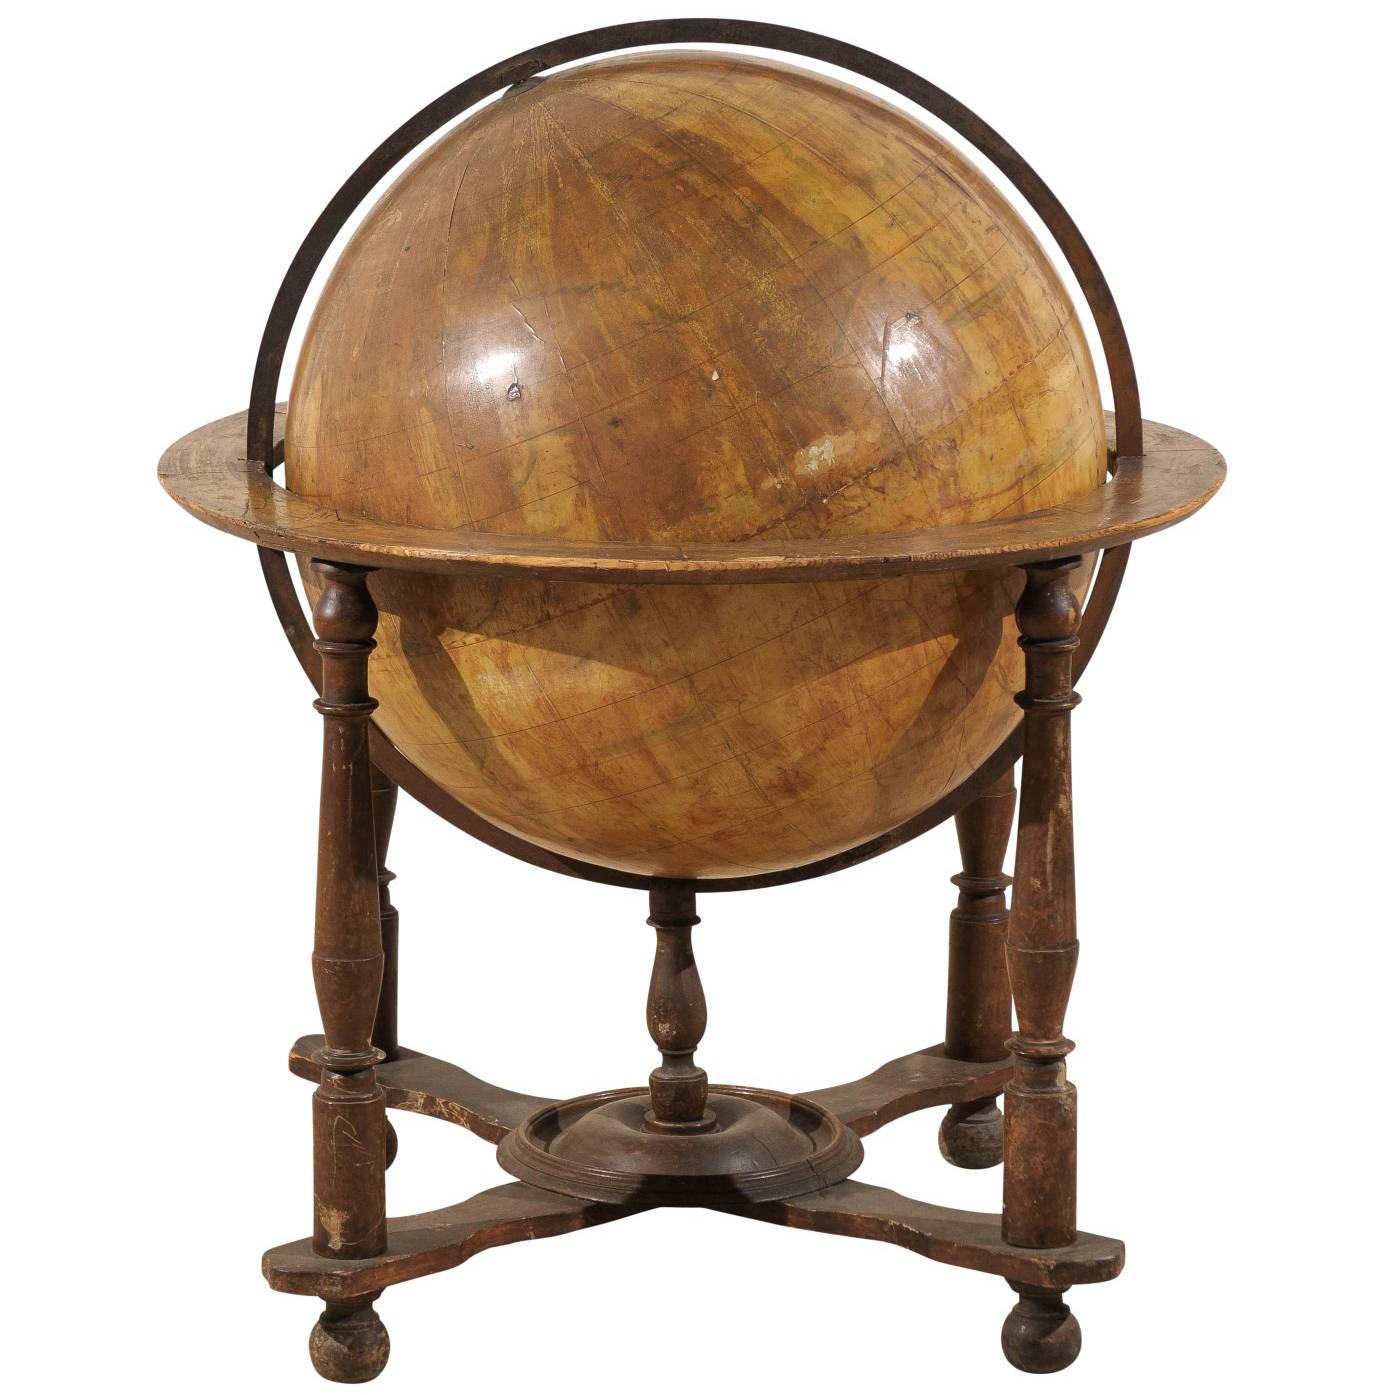 A Large-Sized Italian Heavily Foxed Velum Covered Globe on Wood Stand, 19th C. 